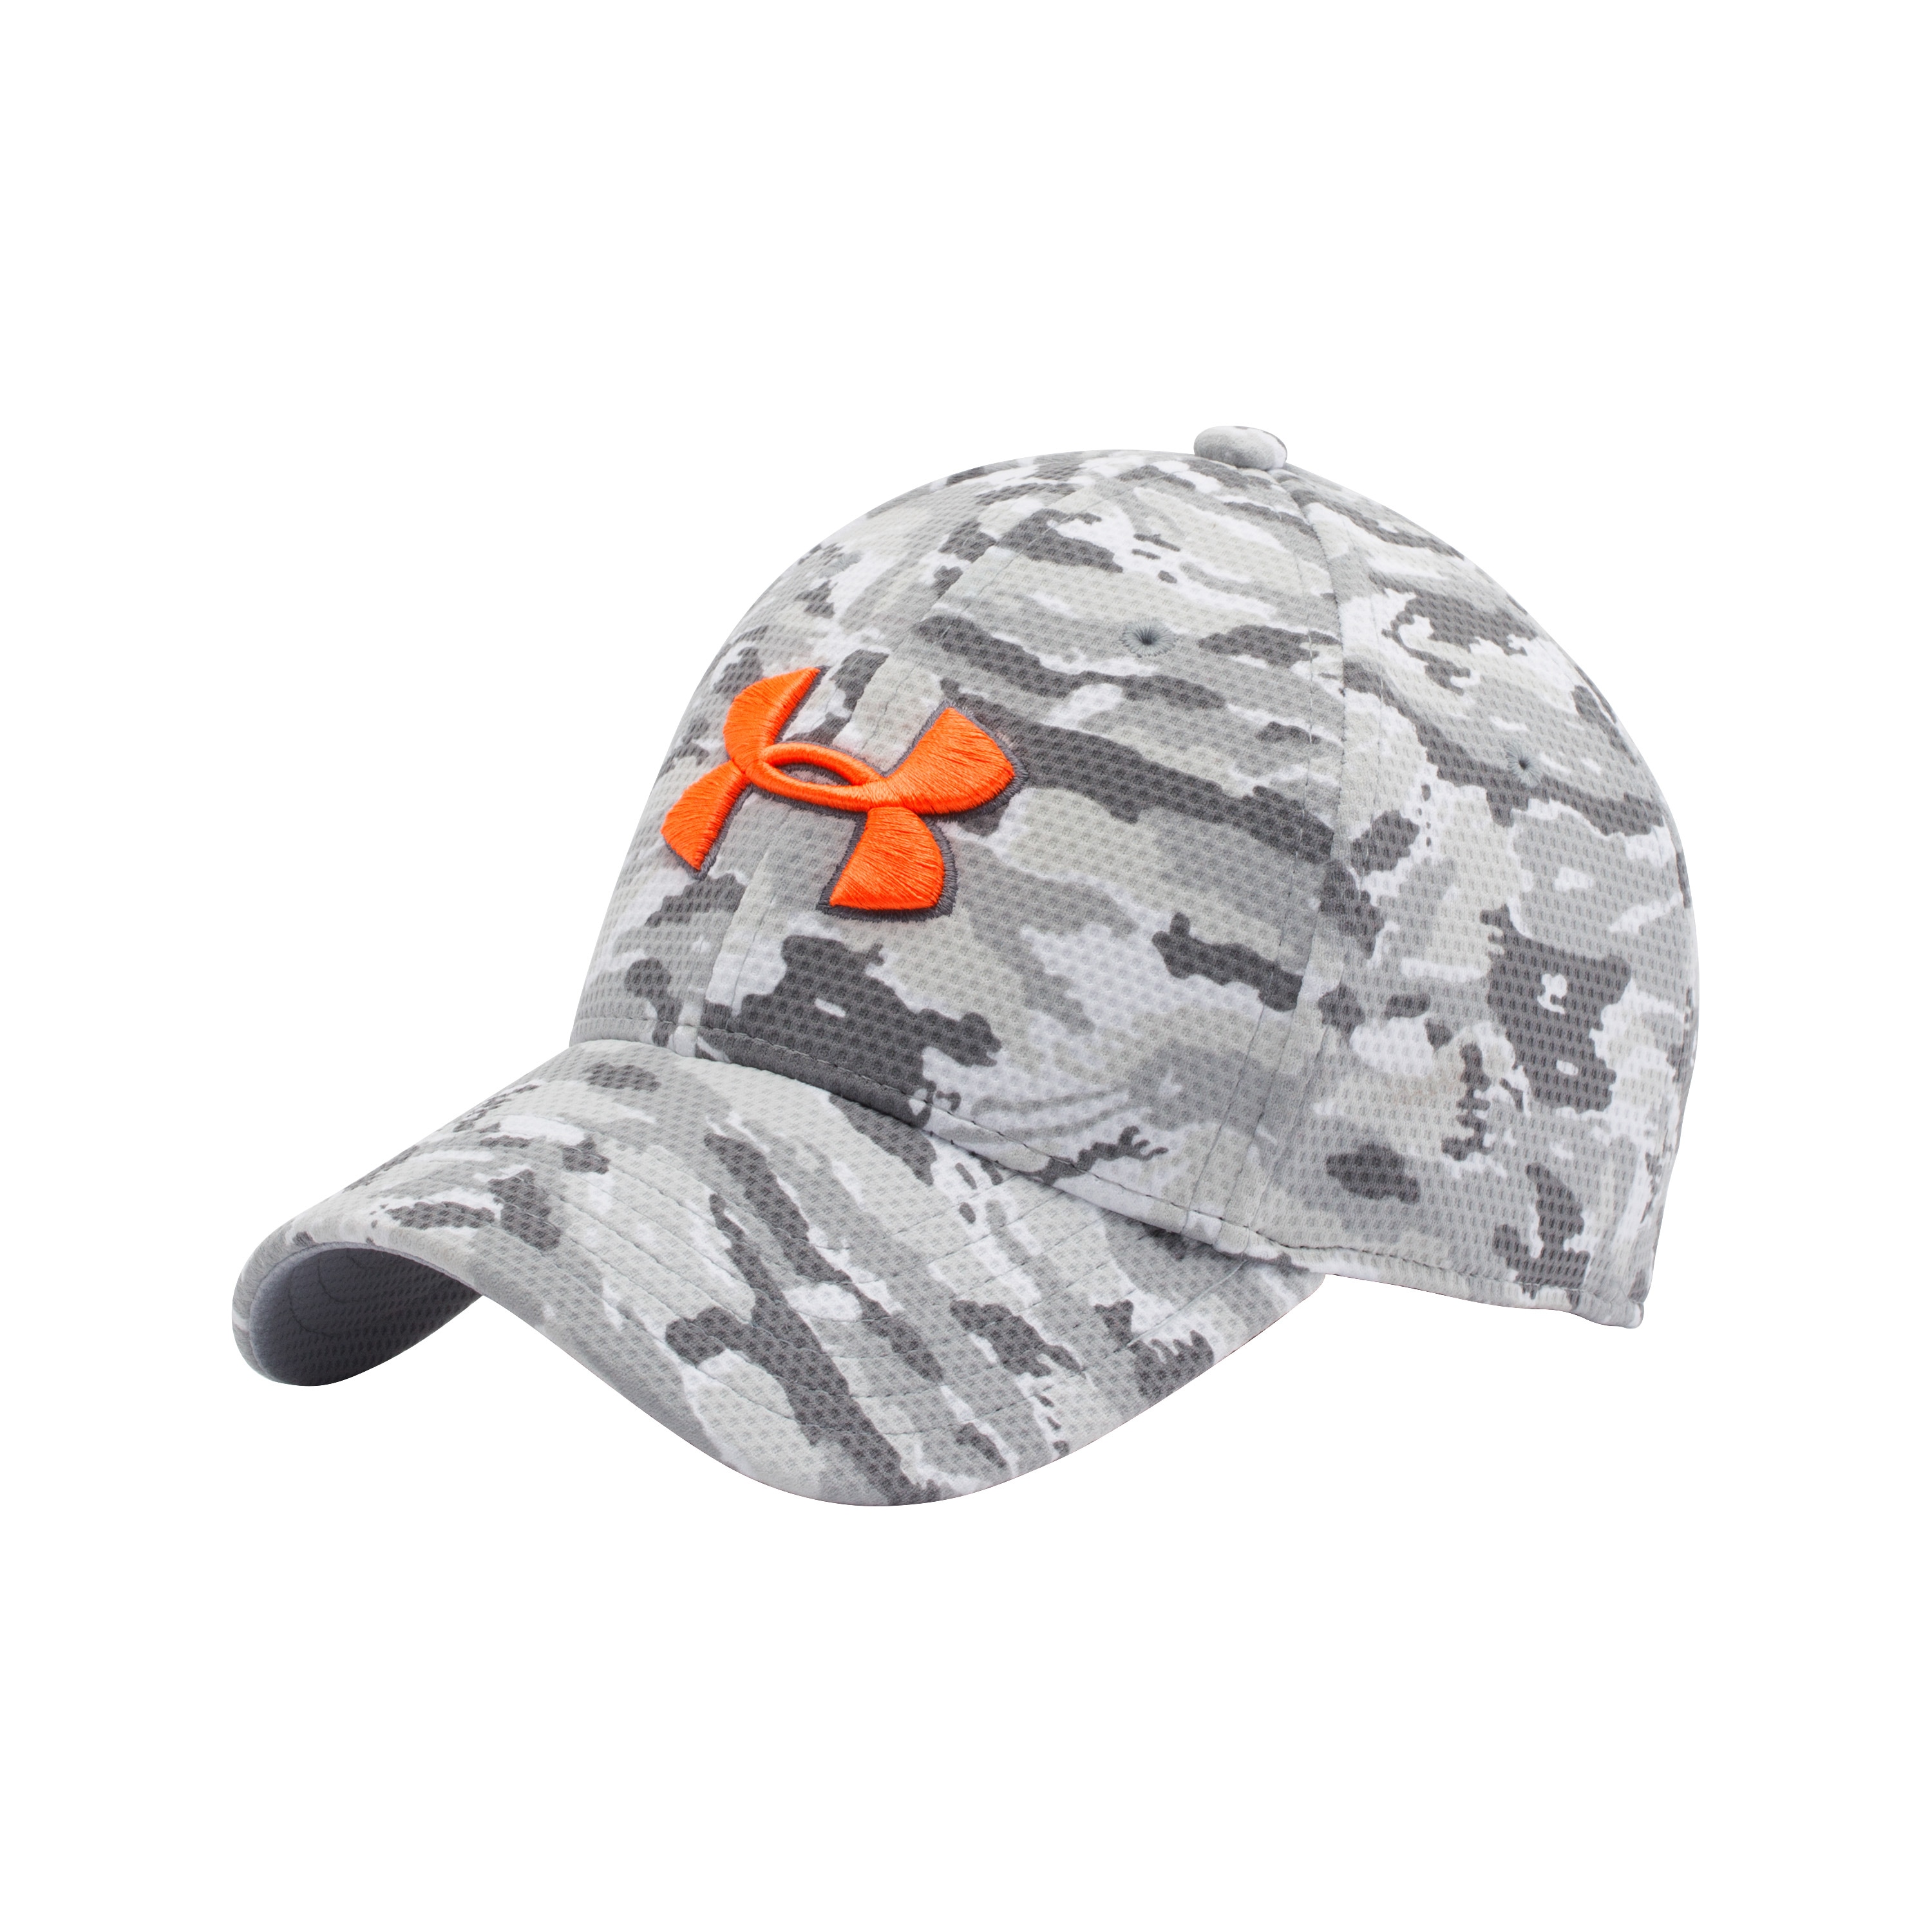 Under Armour, Accessories, Under Armour Camo Hat